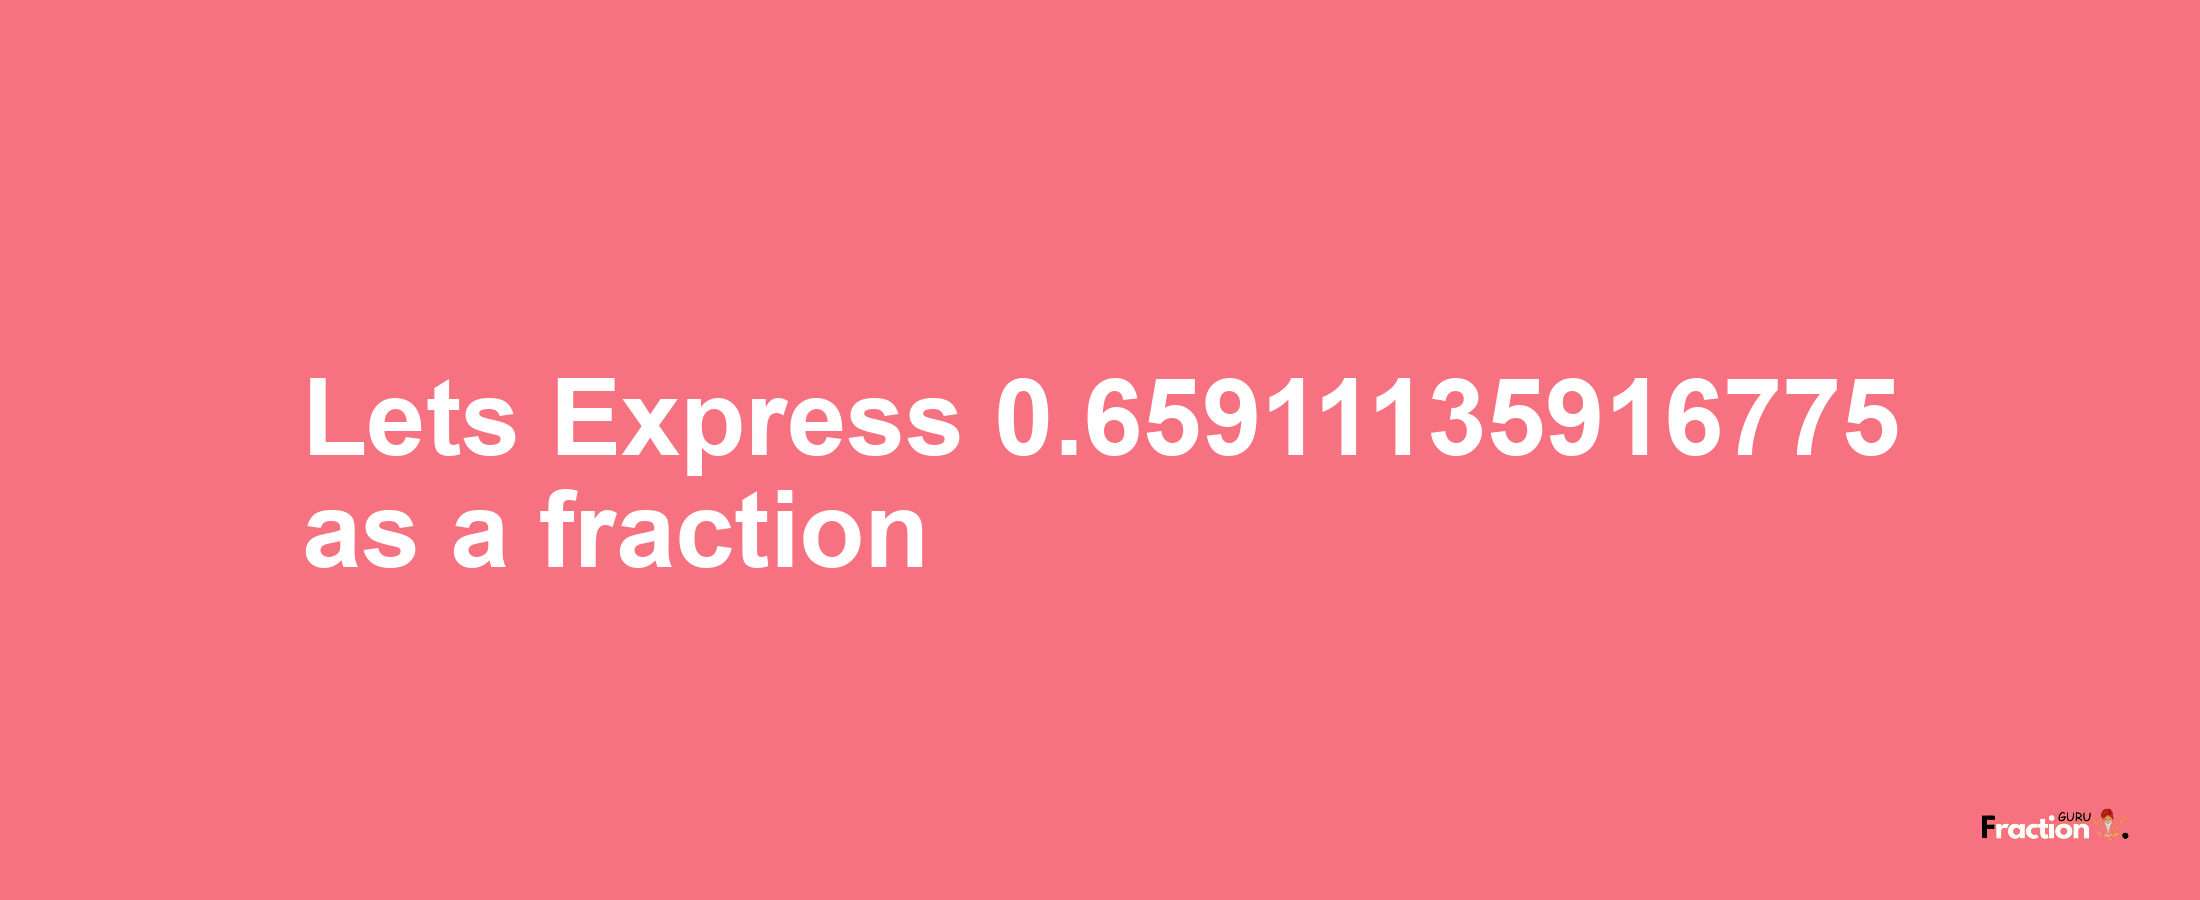 Lets Express 0.65911135916775 as afraction